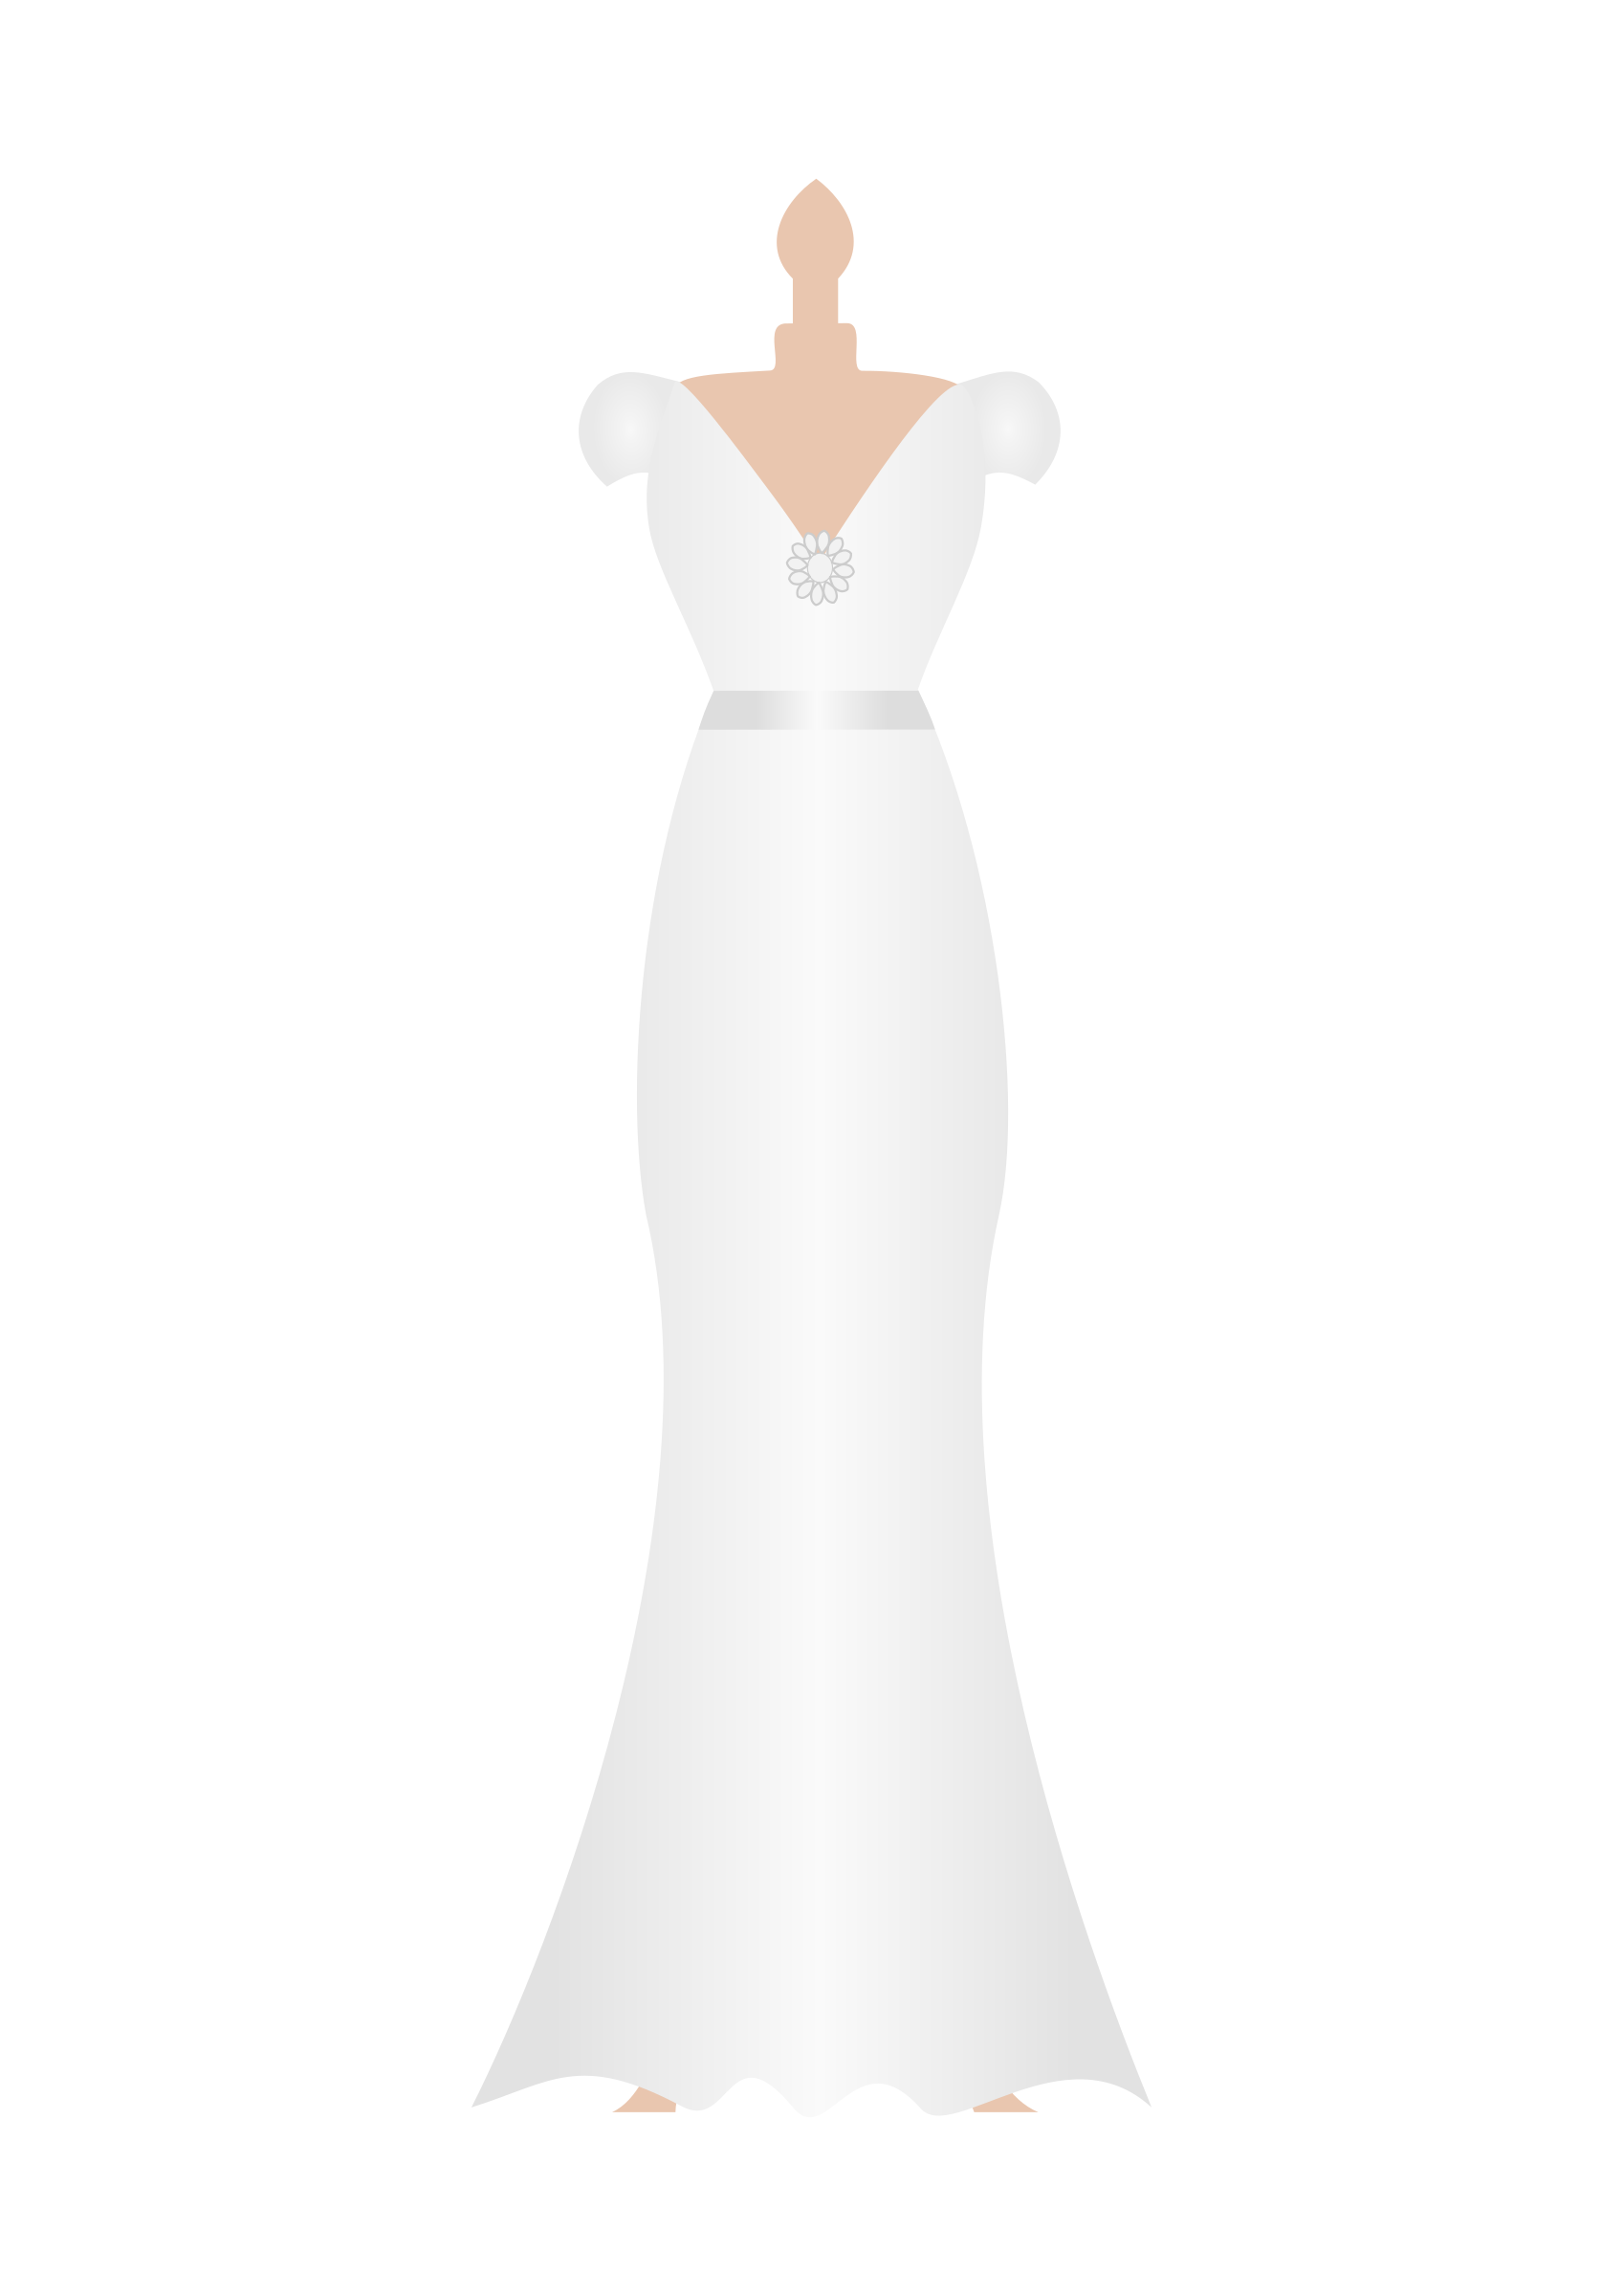 free wedding gown clipart - photo #9